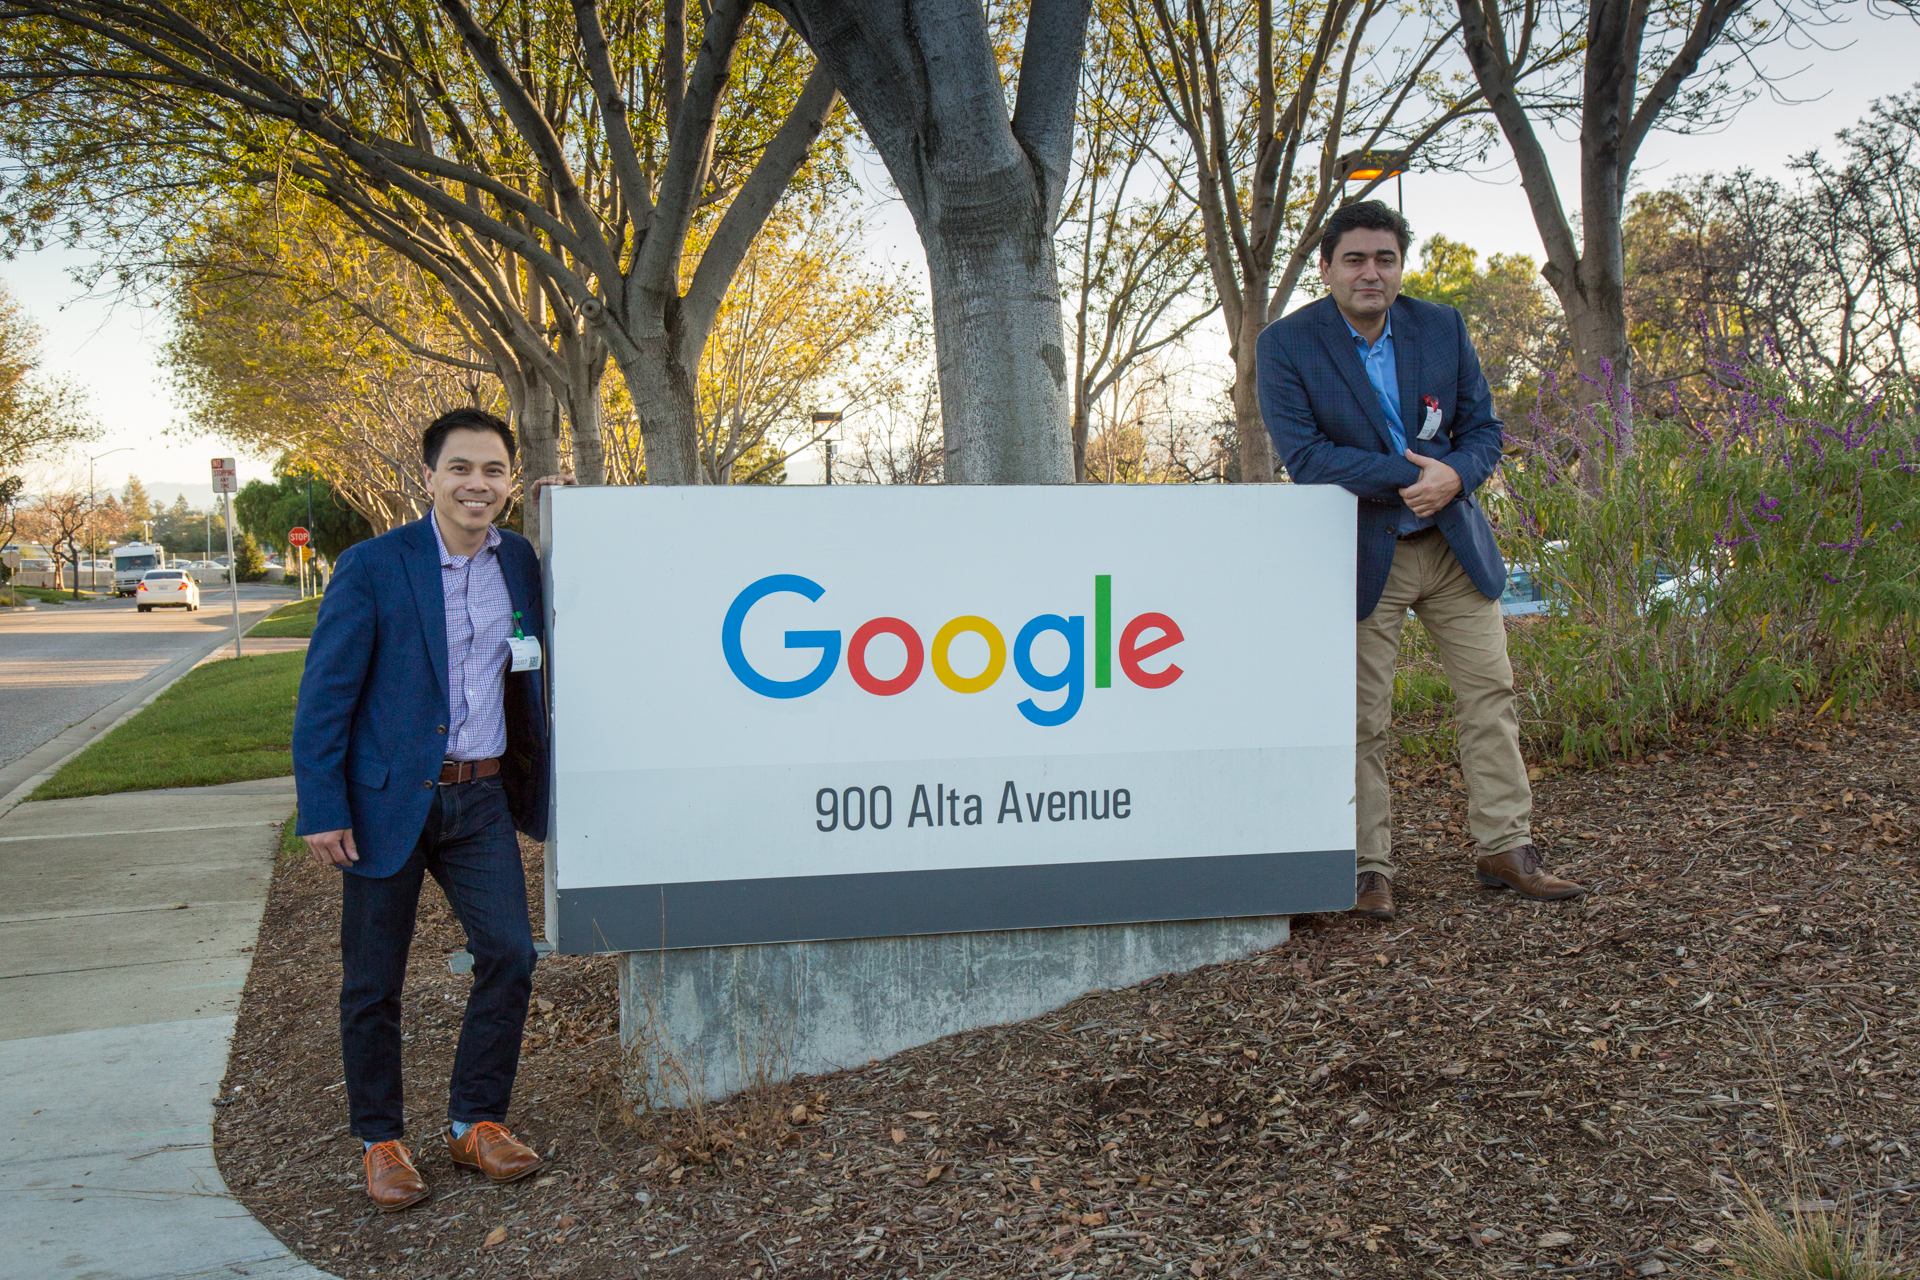 Image of eff Cadavez and Christian Ramirez posing at the entrance of the Google Building in Mountain View, California.